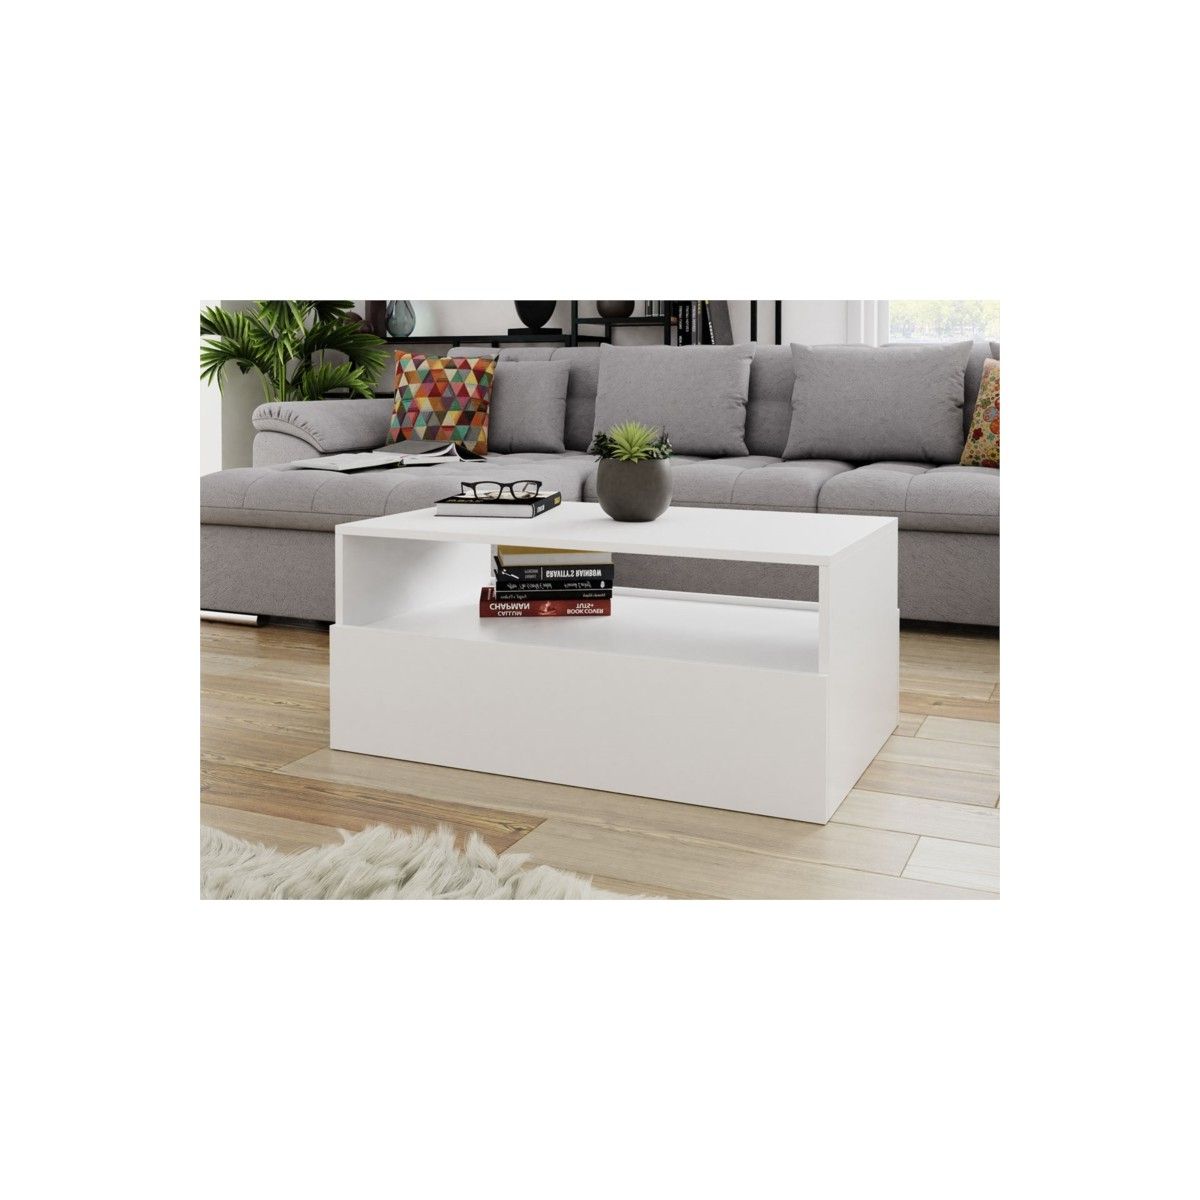 Coffee Table 2 Drawers 90 Cm Drek (white) – Amp Story 8929 Pertaining To Popular 2 Drawer Coffee Tables (View 4 of 20)